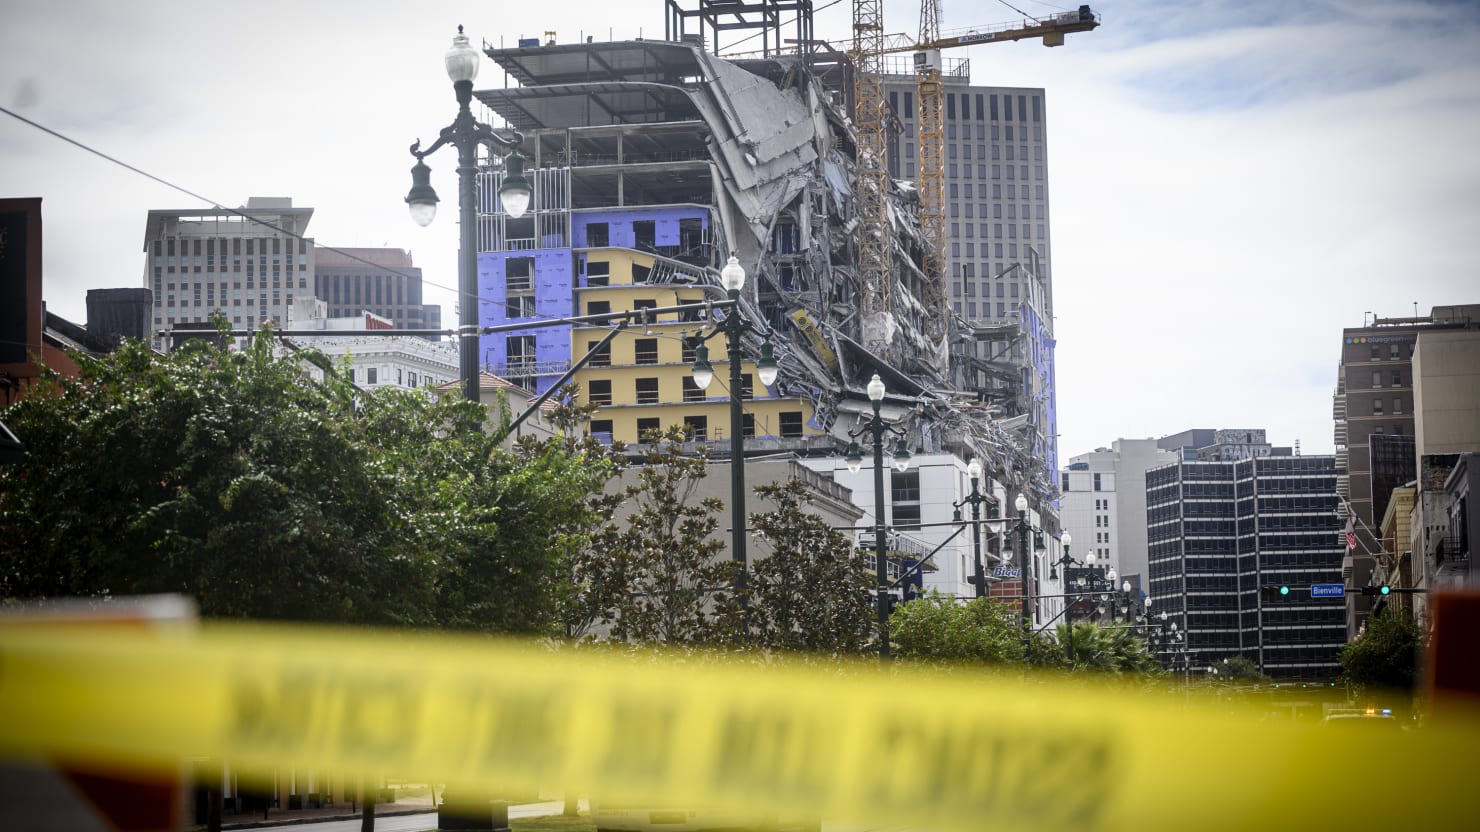 Video: Hard Rock Hotel in New Orleans Where Three Died Demolished1480 x 832